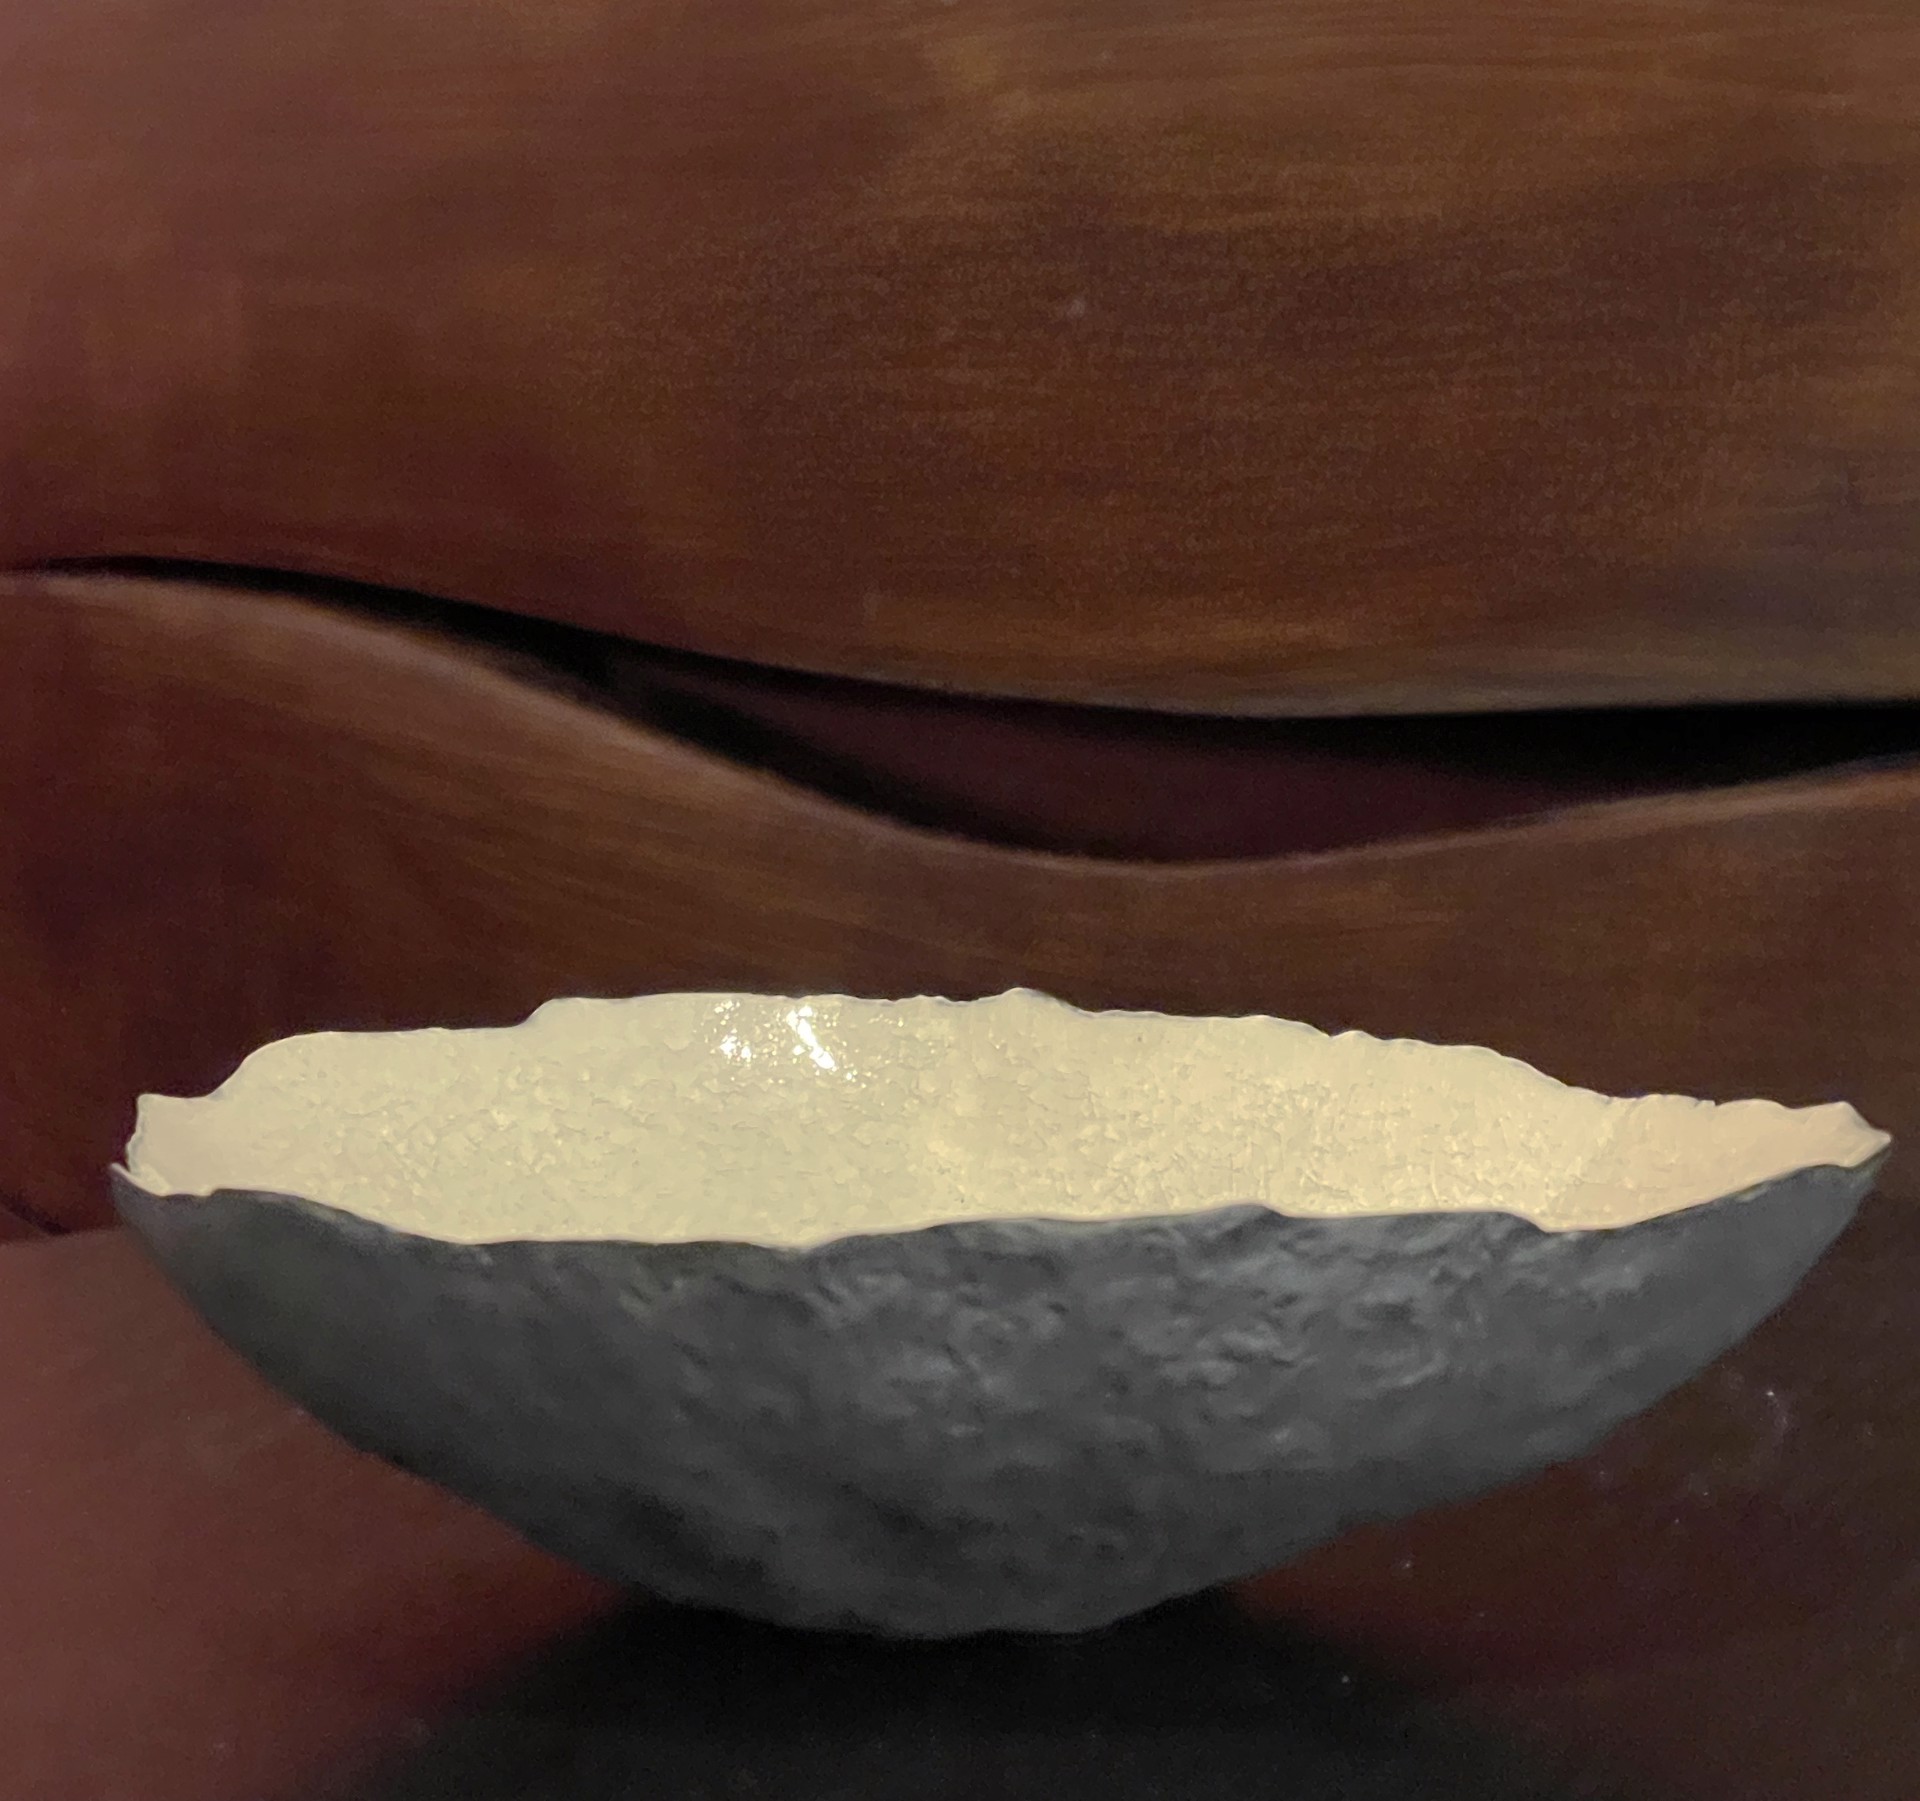 Vessel with white crackles - one of 2 by Cristina Salusti